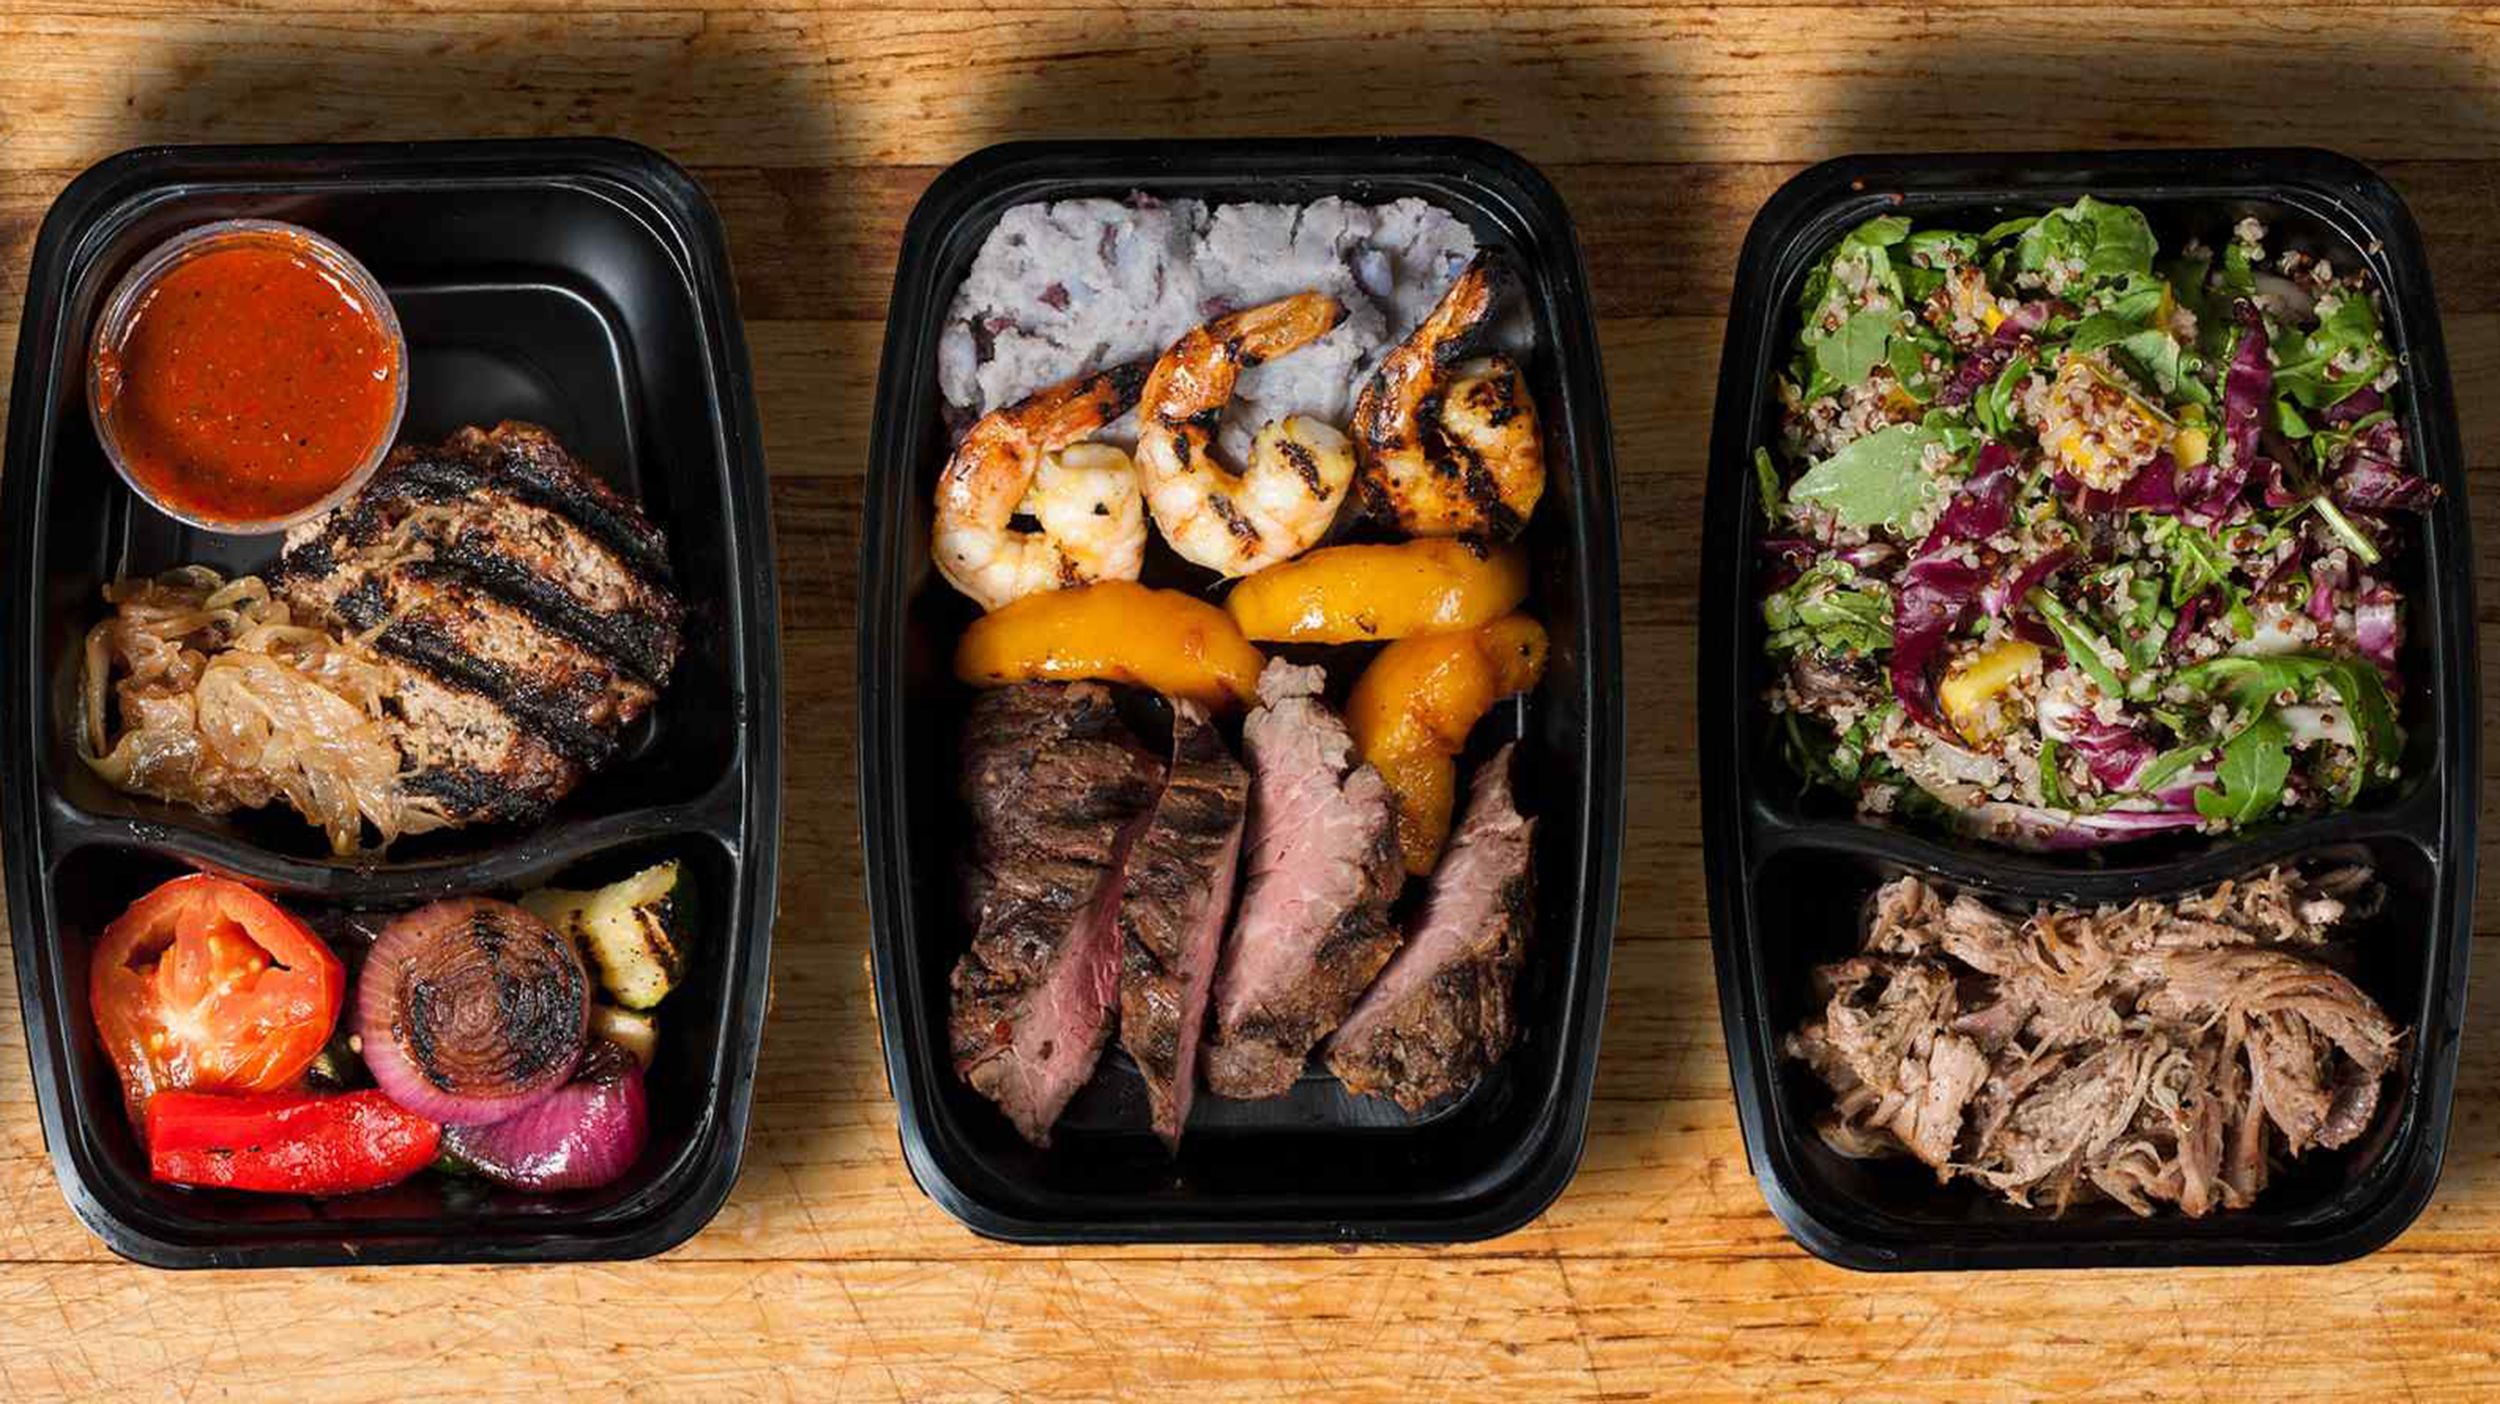 Factor Meal Delivery Service Is on Super Sale Right Now